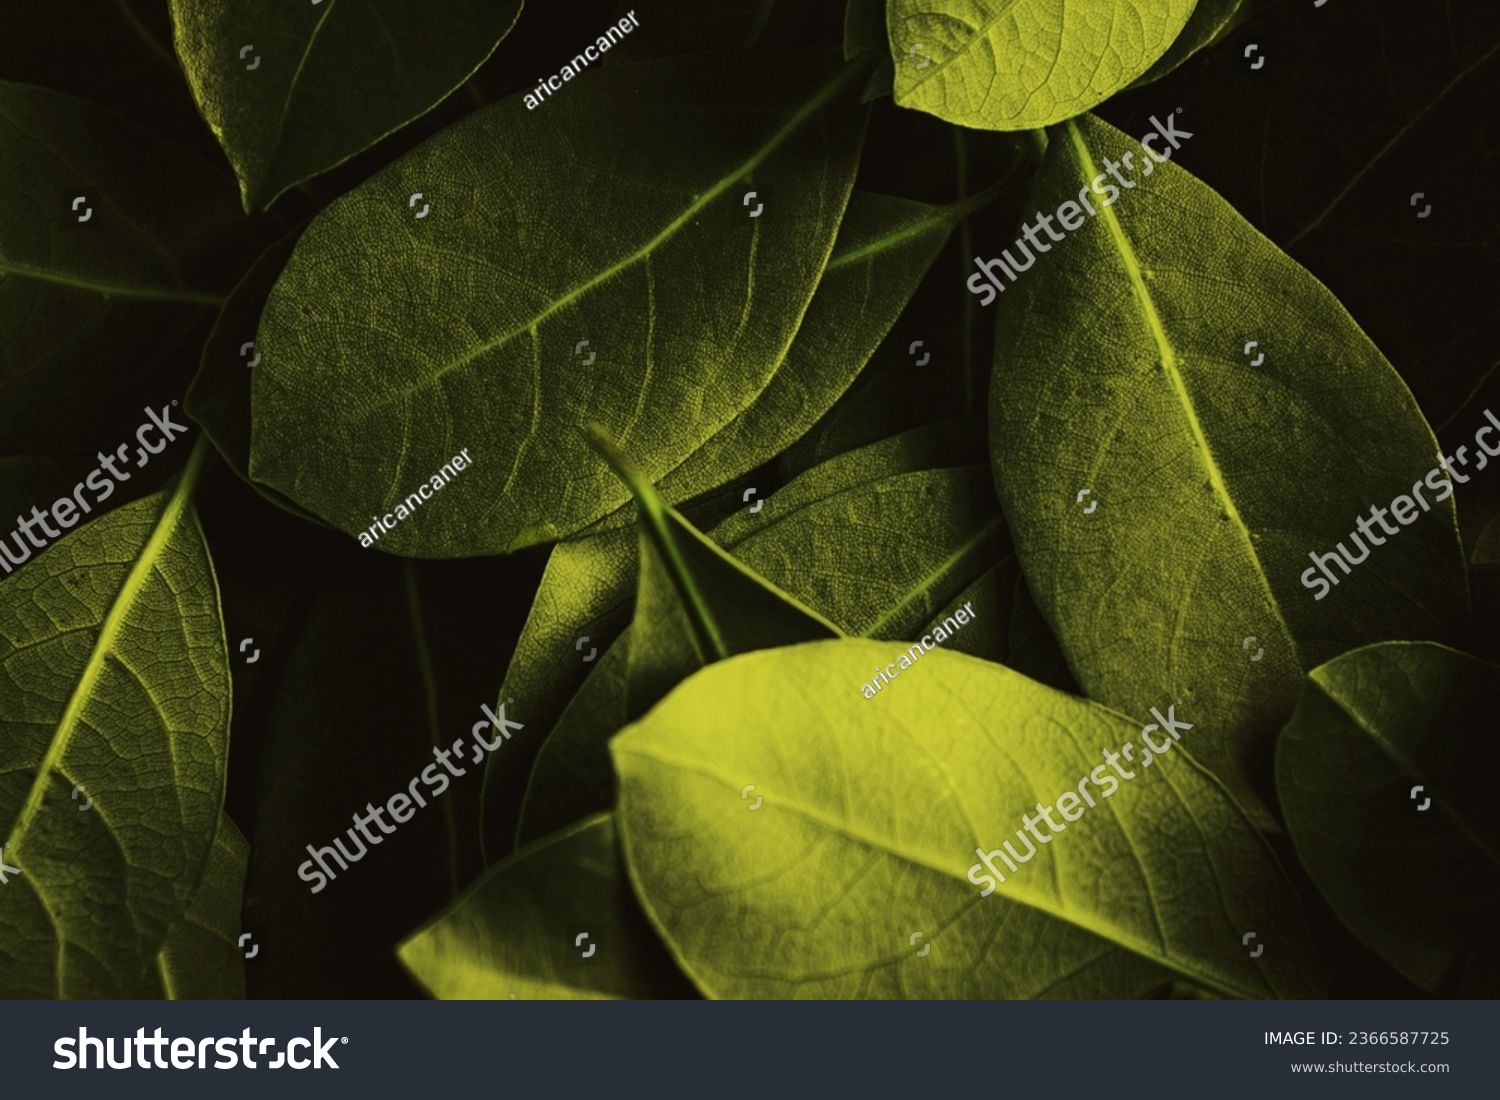 Close up of leaves. Daphne leaves background high angle view. Selective focus included. #2366587725